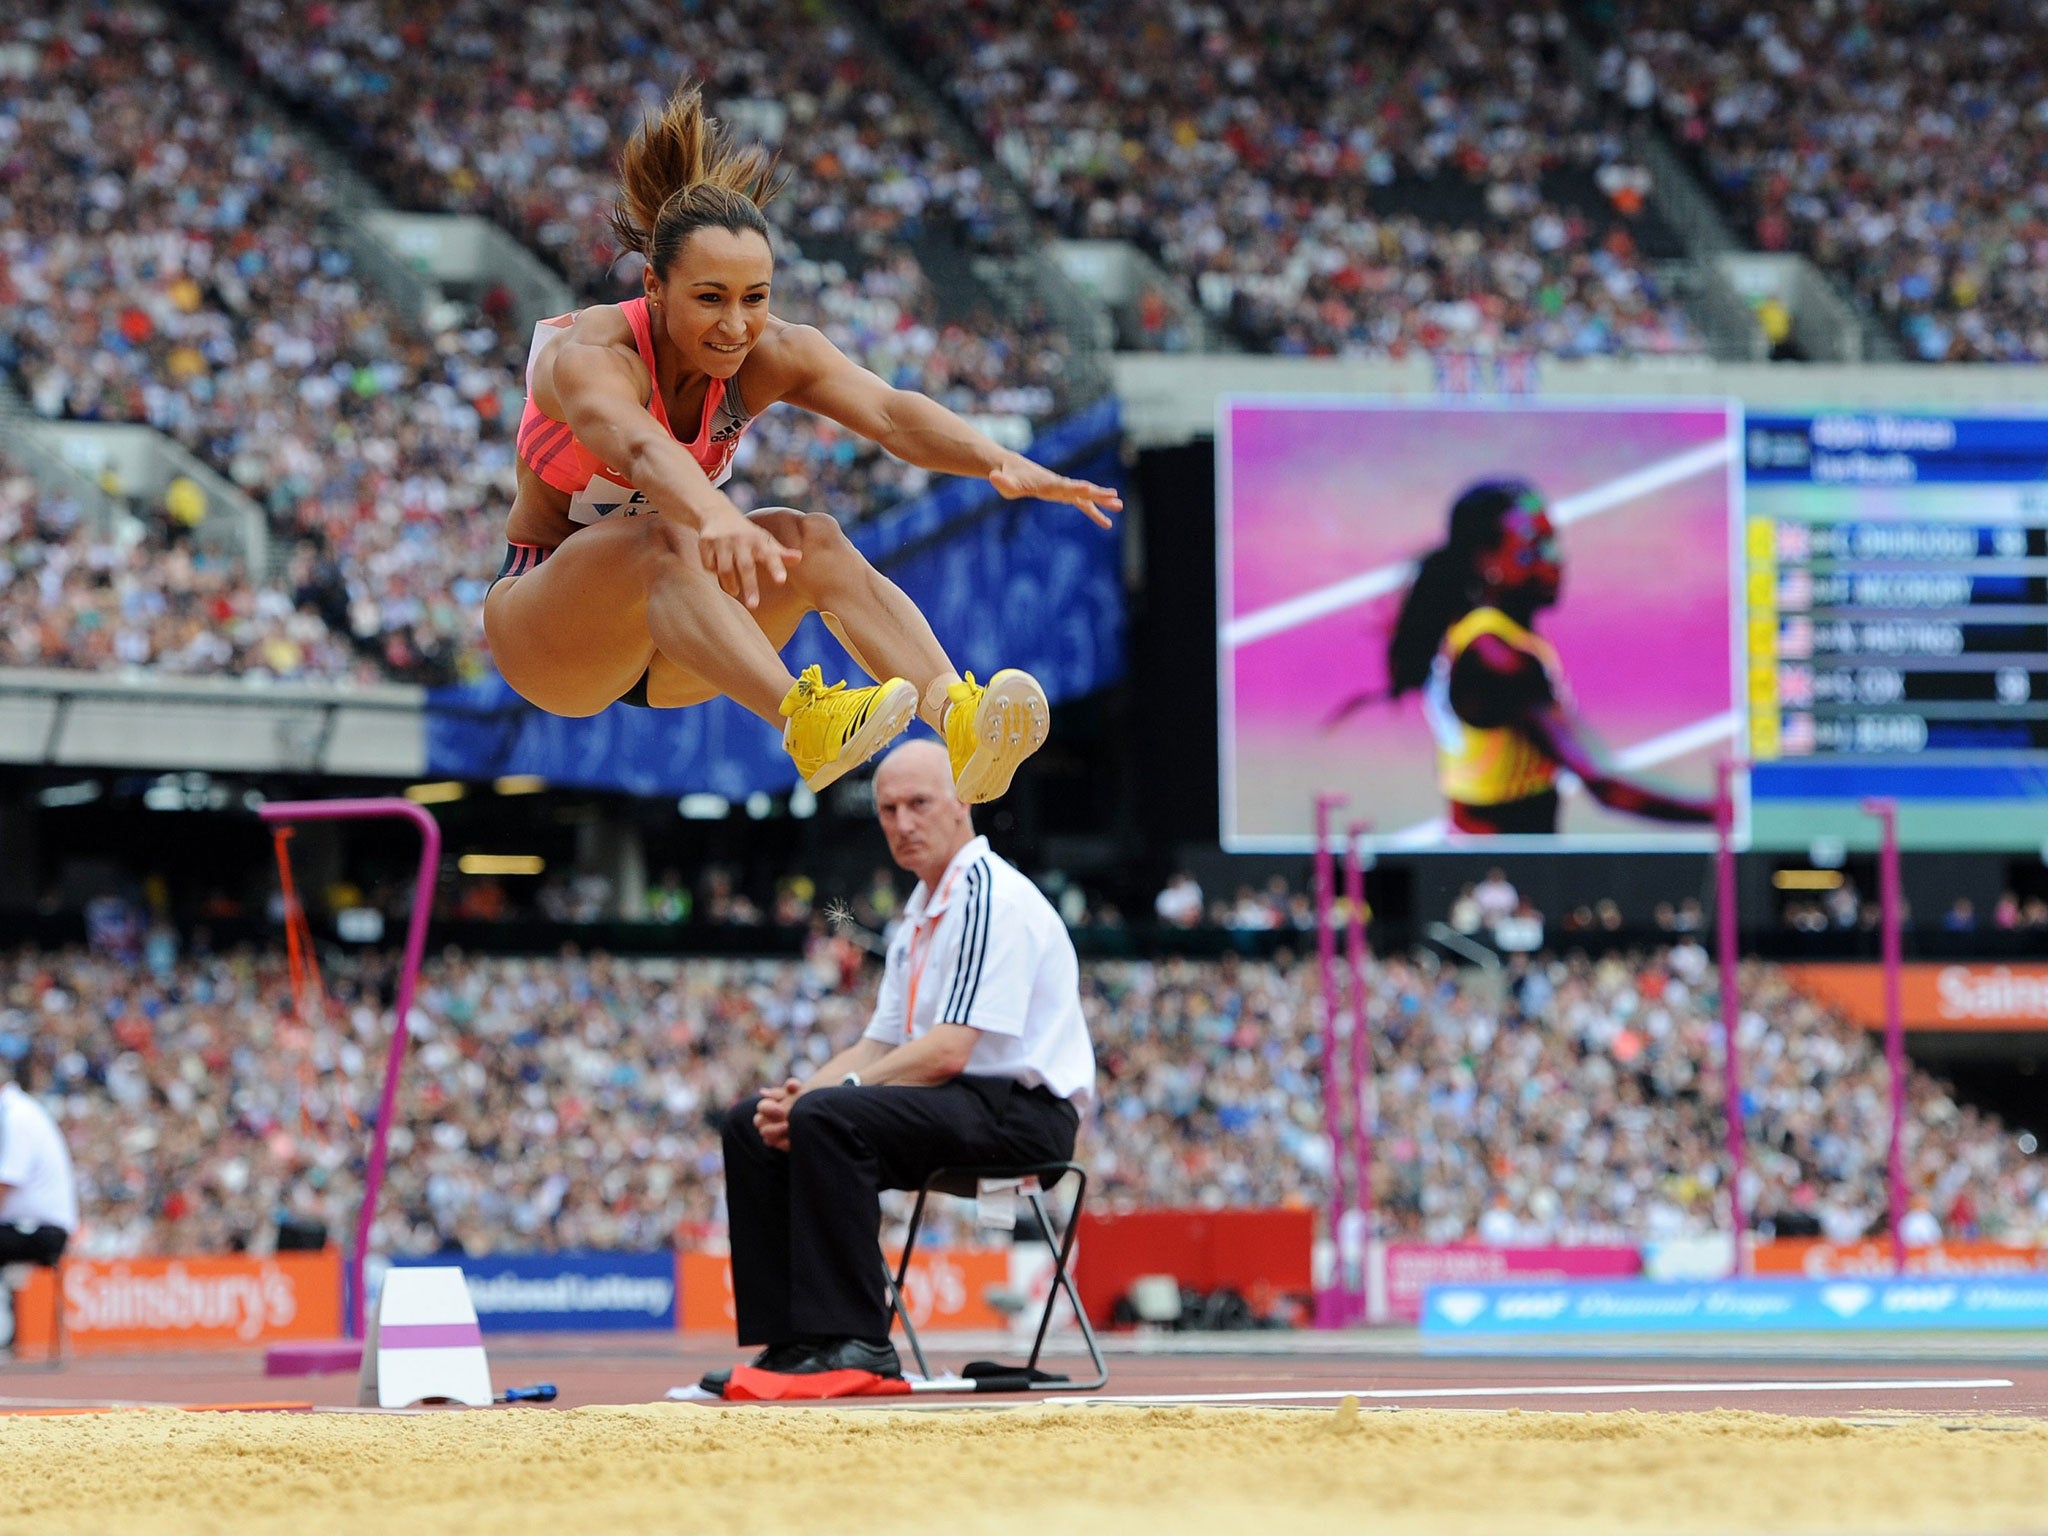 Leap of faith: Jessica Ennis-Hill continues her comeback from injury at the Anniversary Games in London